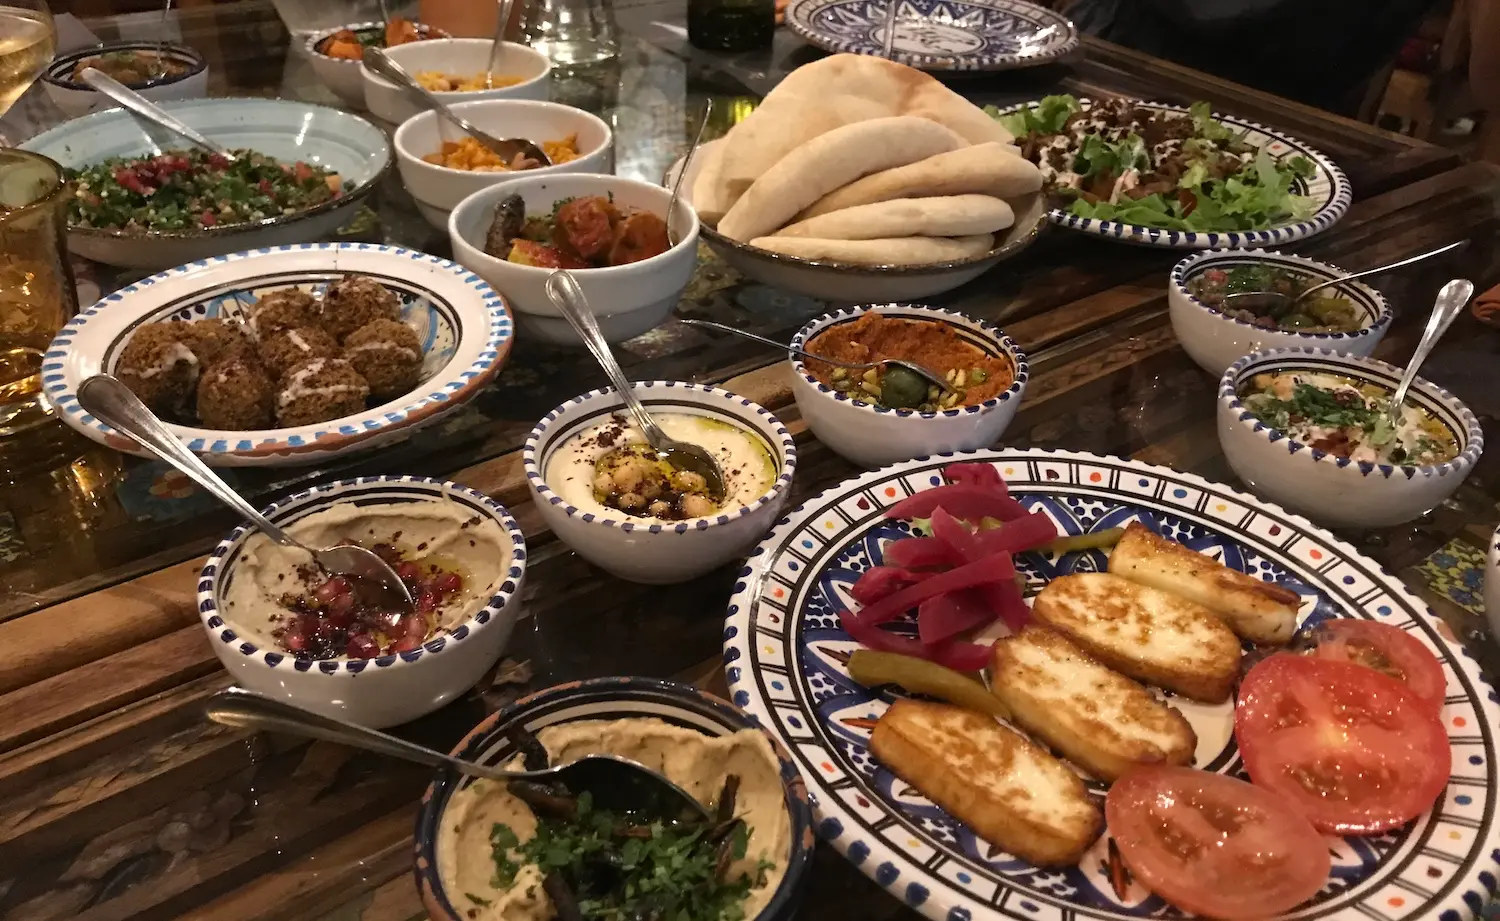 Turkish meze on the table